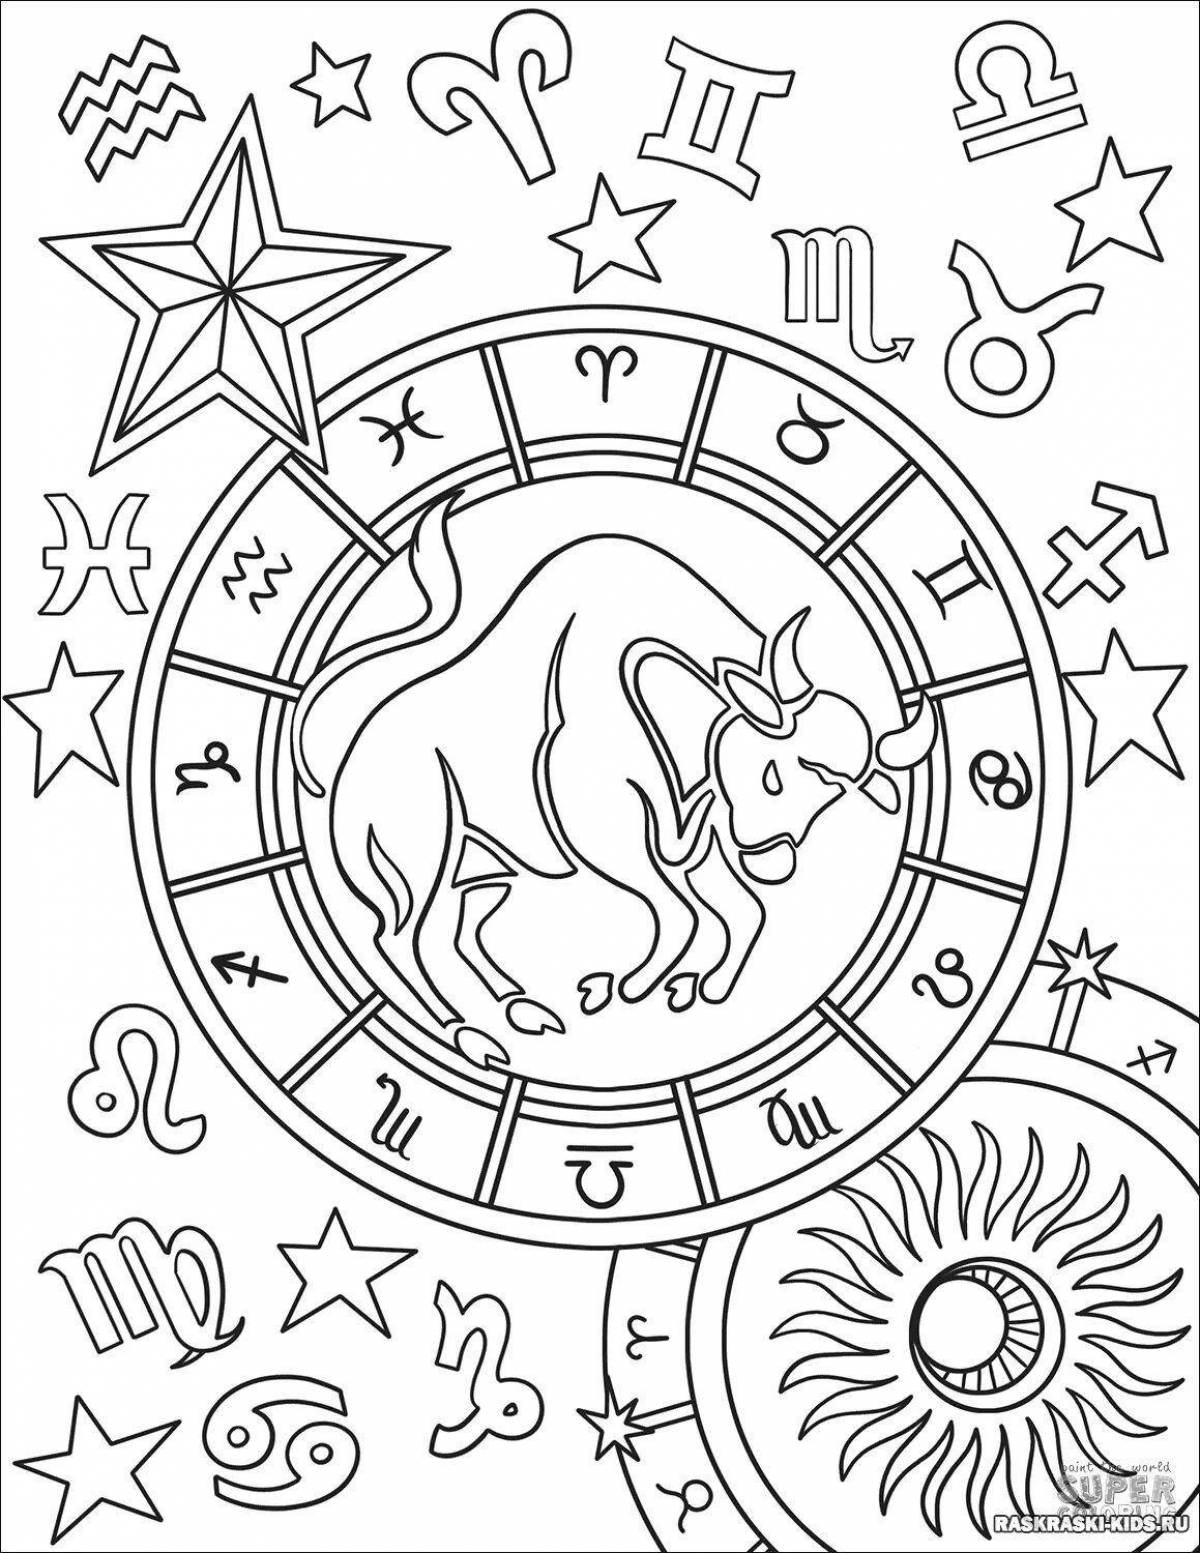 Colorful zodiac signs coloring pages for kids to paint